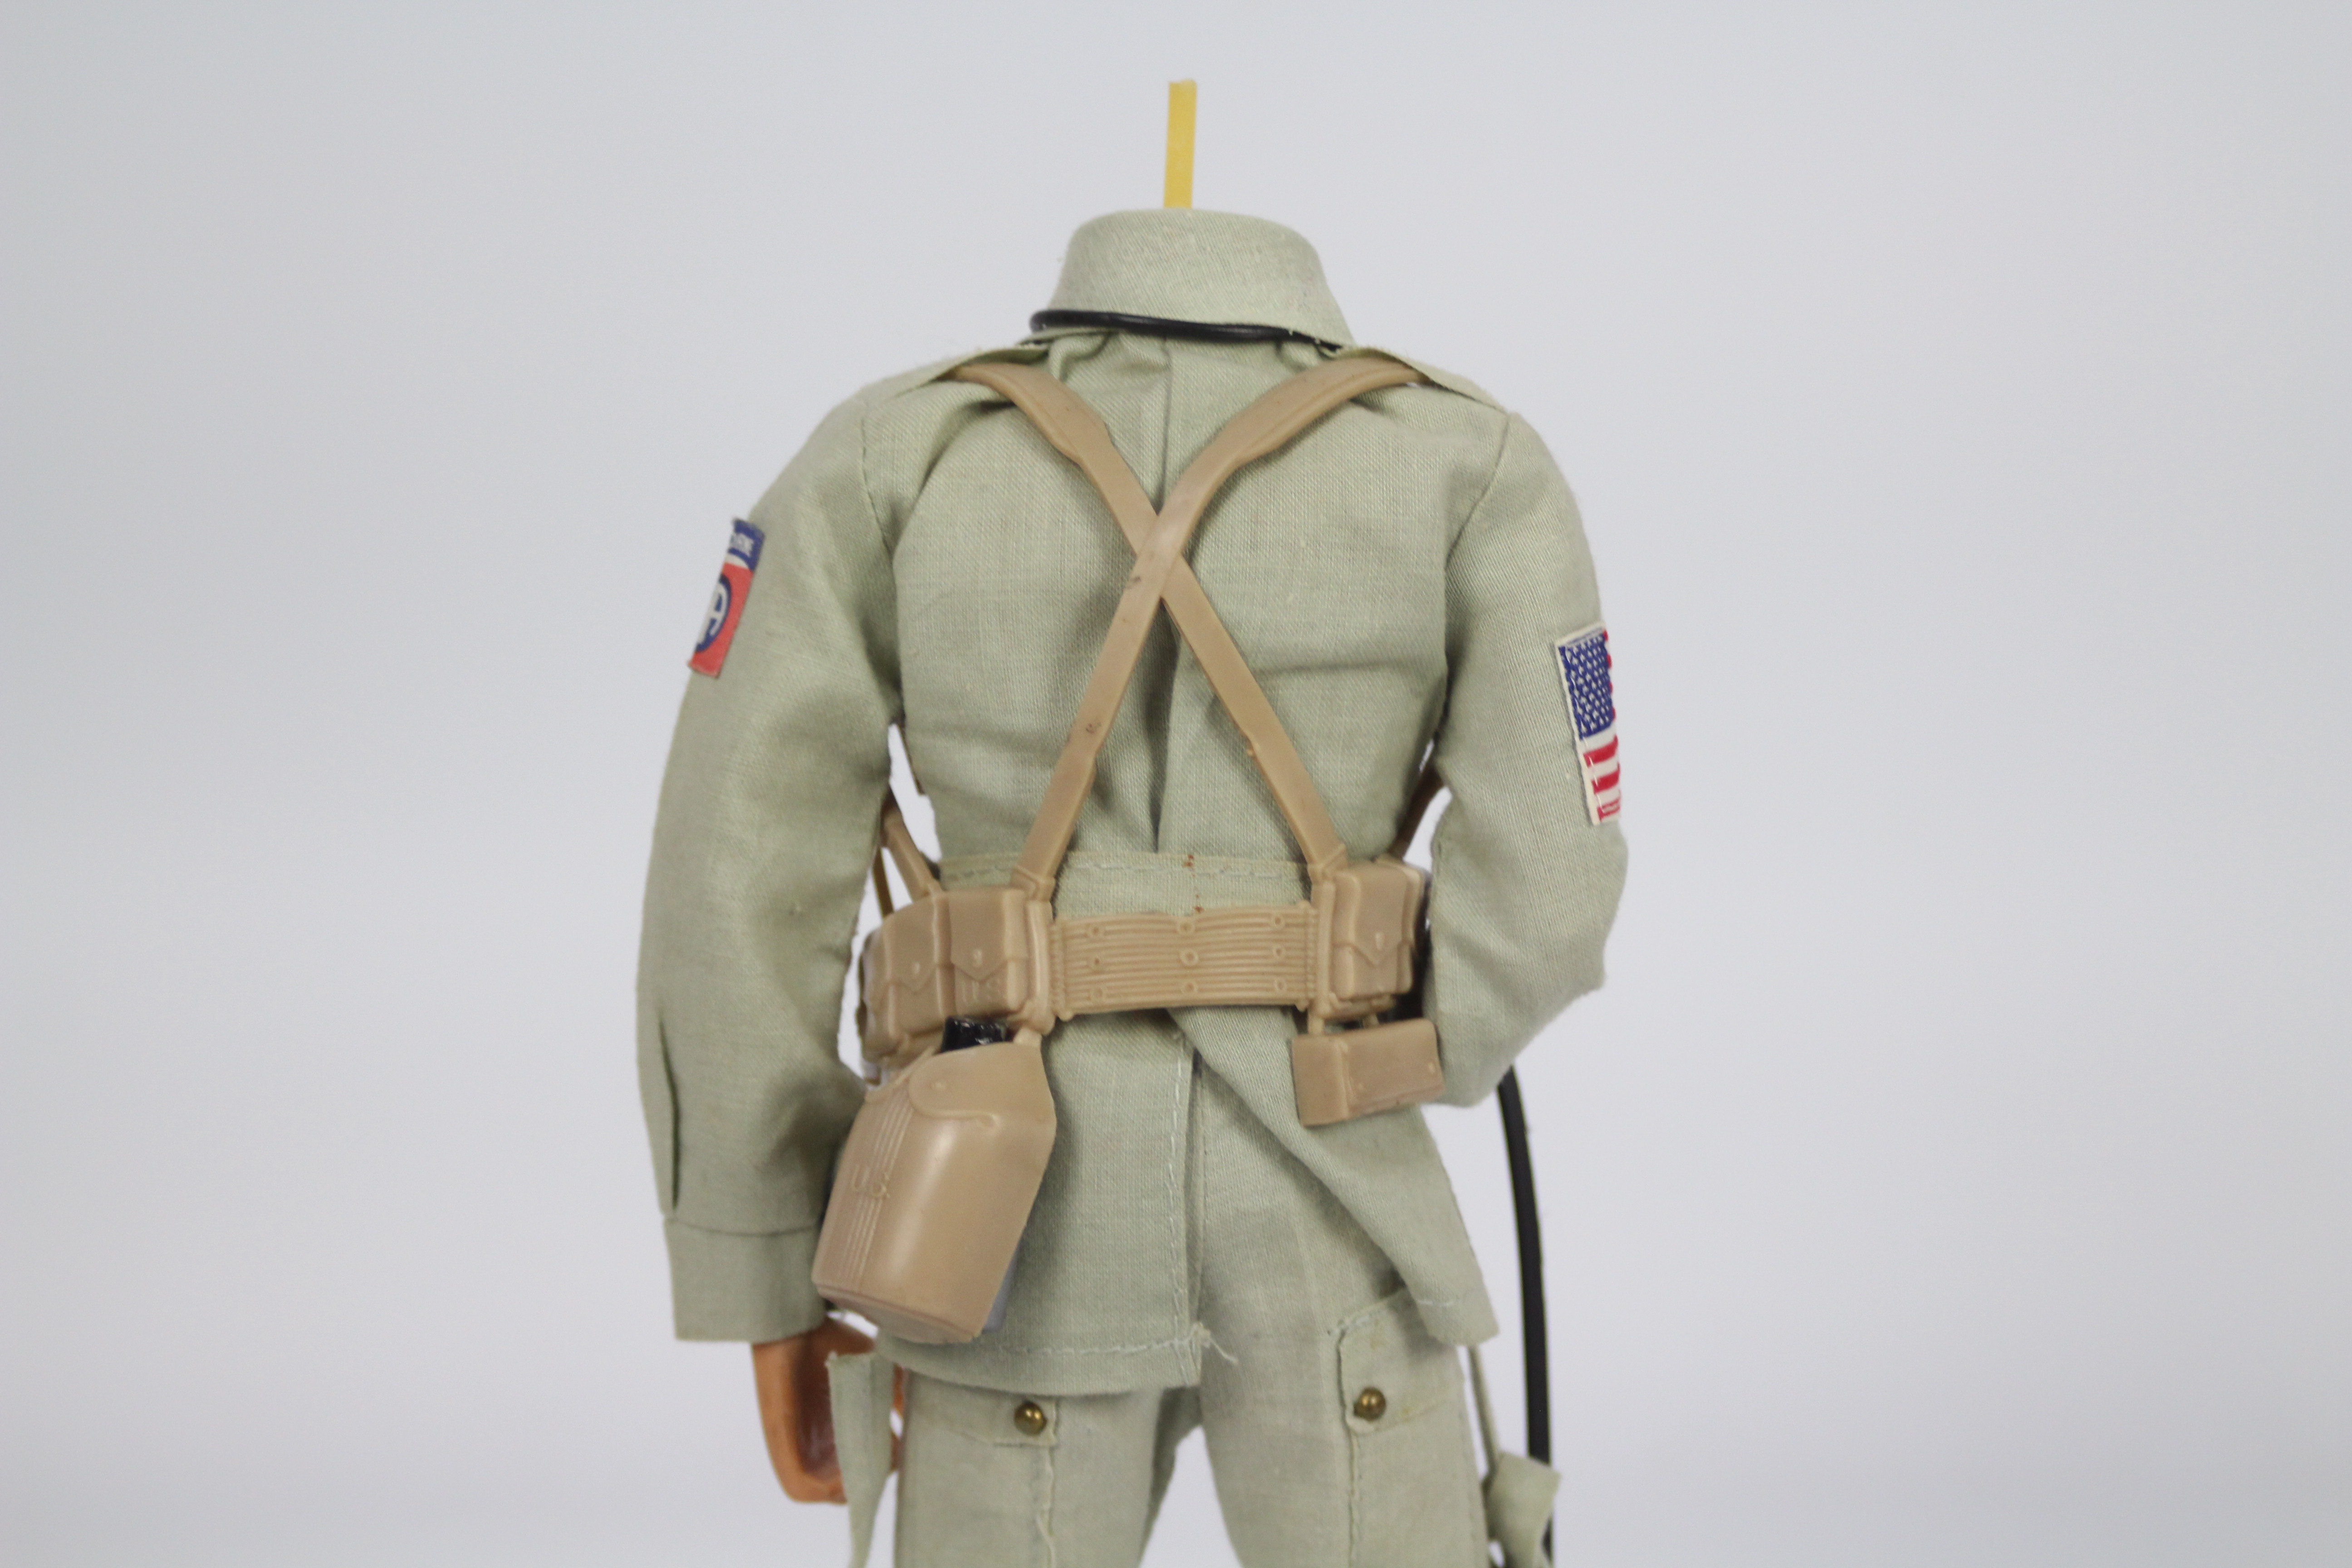 Palitoy, Action Man - A Palitoy Action Man figure in US Paratrooper outfit. - Image 6 of 7